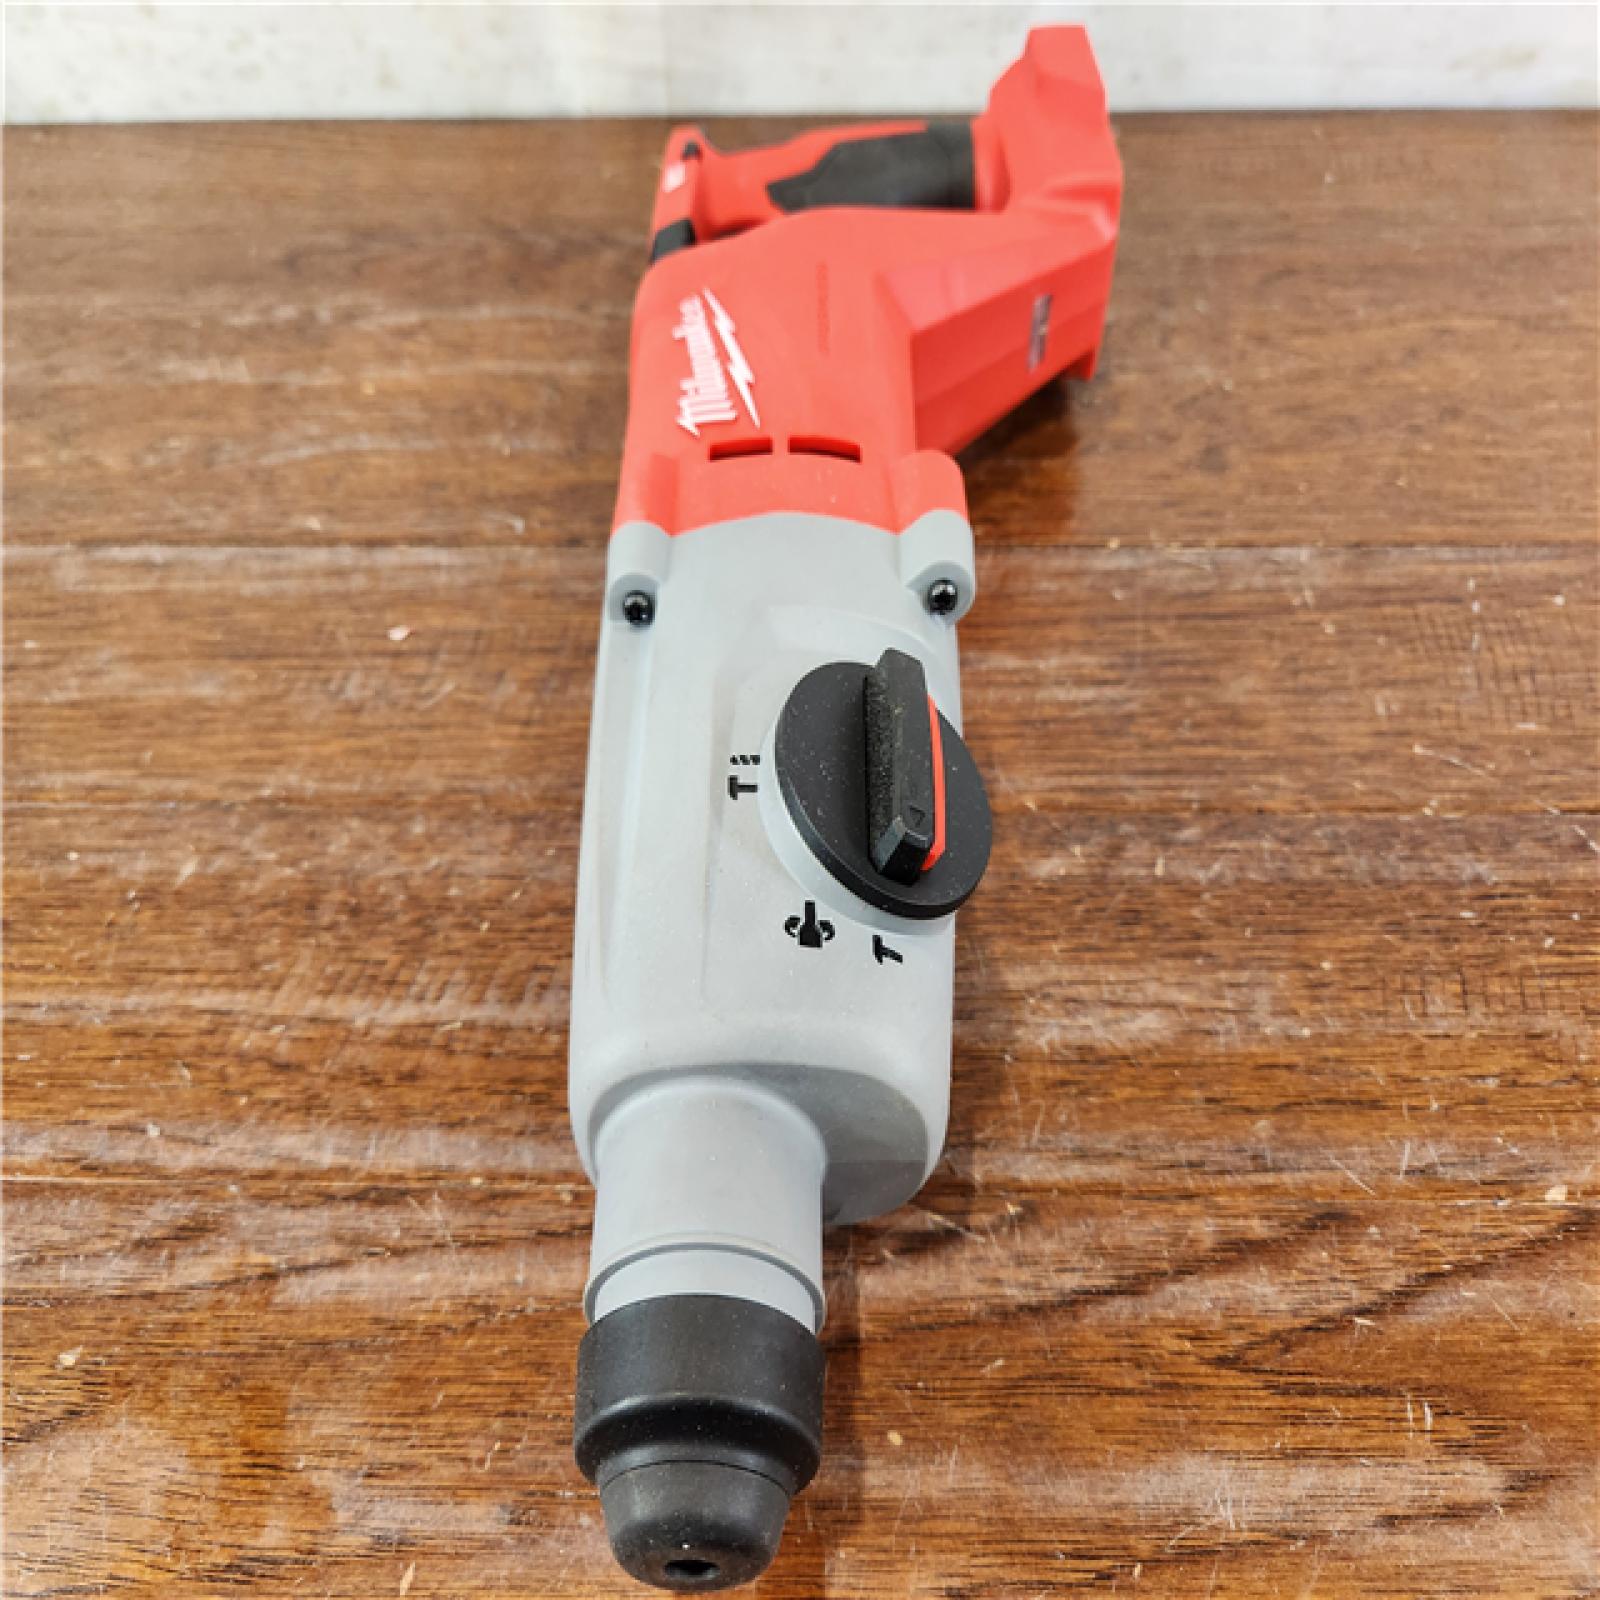 AS-IS Milwaukee M18 Lithium-Ion Brushless Cordless SDS Plus D-Handle Rotary Hammer (Tool Only)